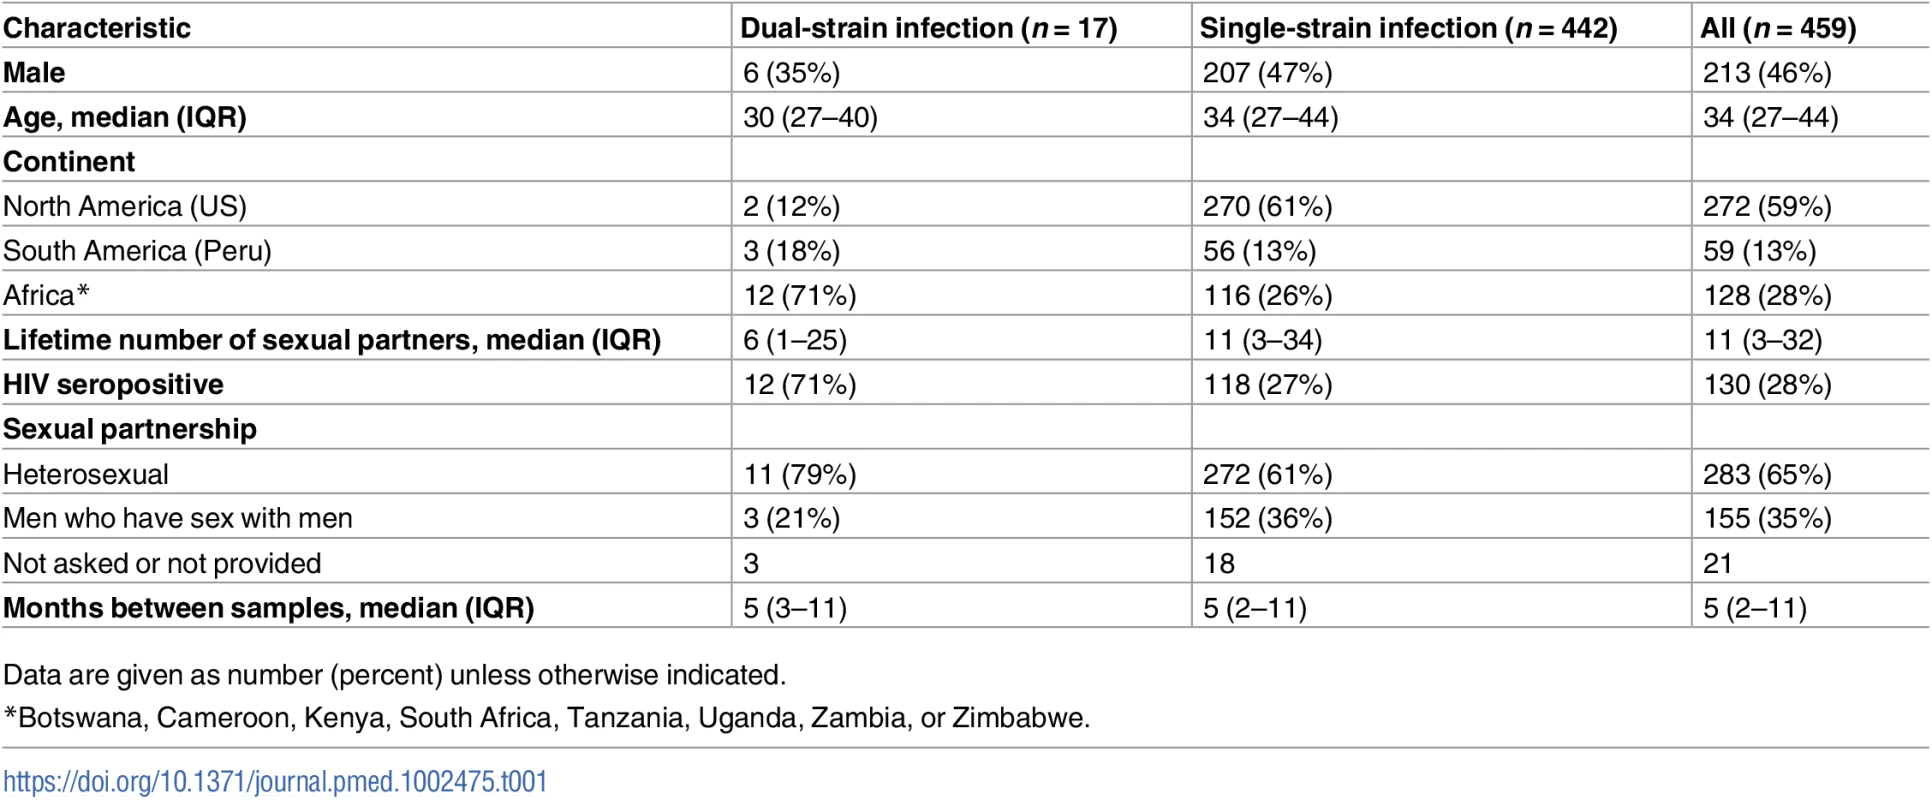 Baseline characteristics of the study population, stratified by the presence of dual-strain infection.